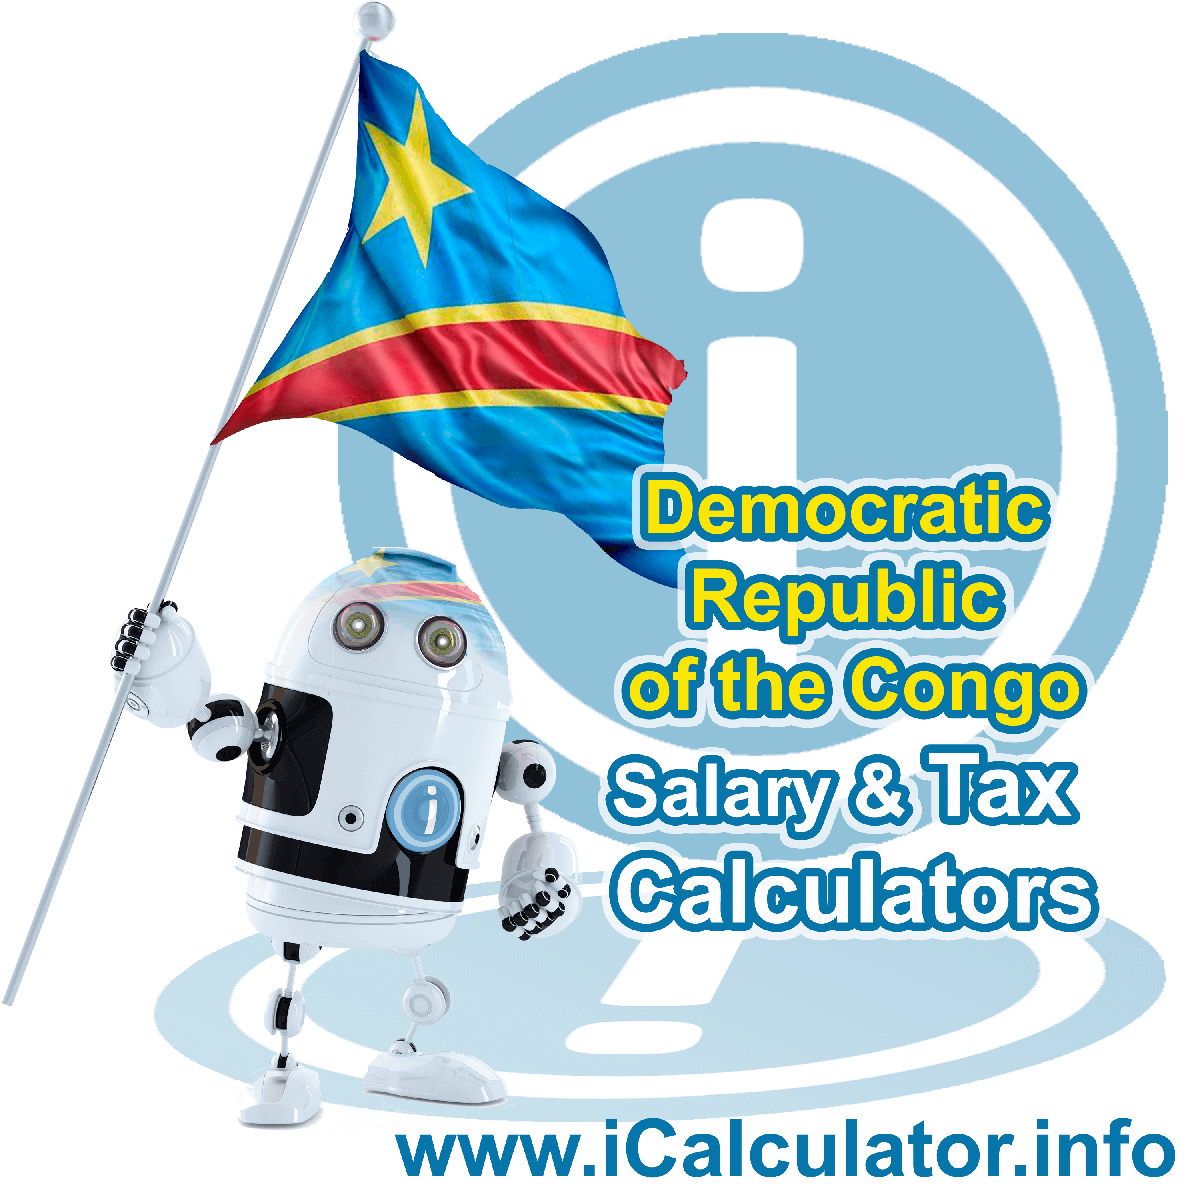 Democratic Republic Of The Congo Salary Calculator. This image shows the Democratic Republic Of The Congoese flag and information relating to the tax formula for the Democratic Republic Of The Congo Tax Calculator